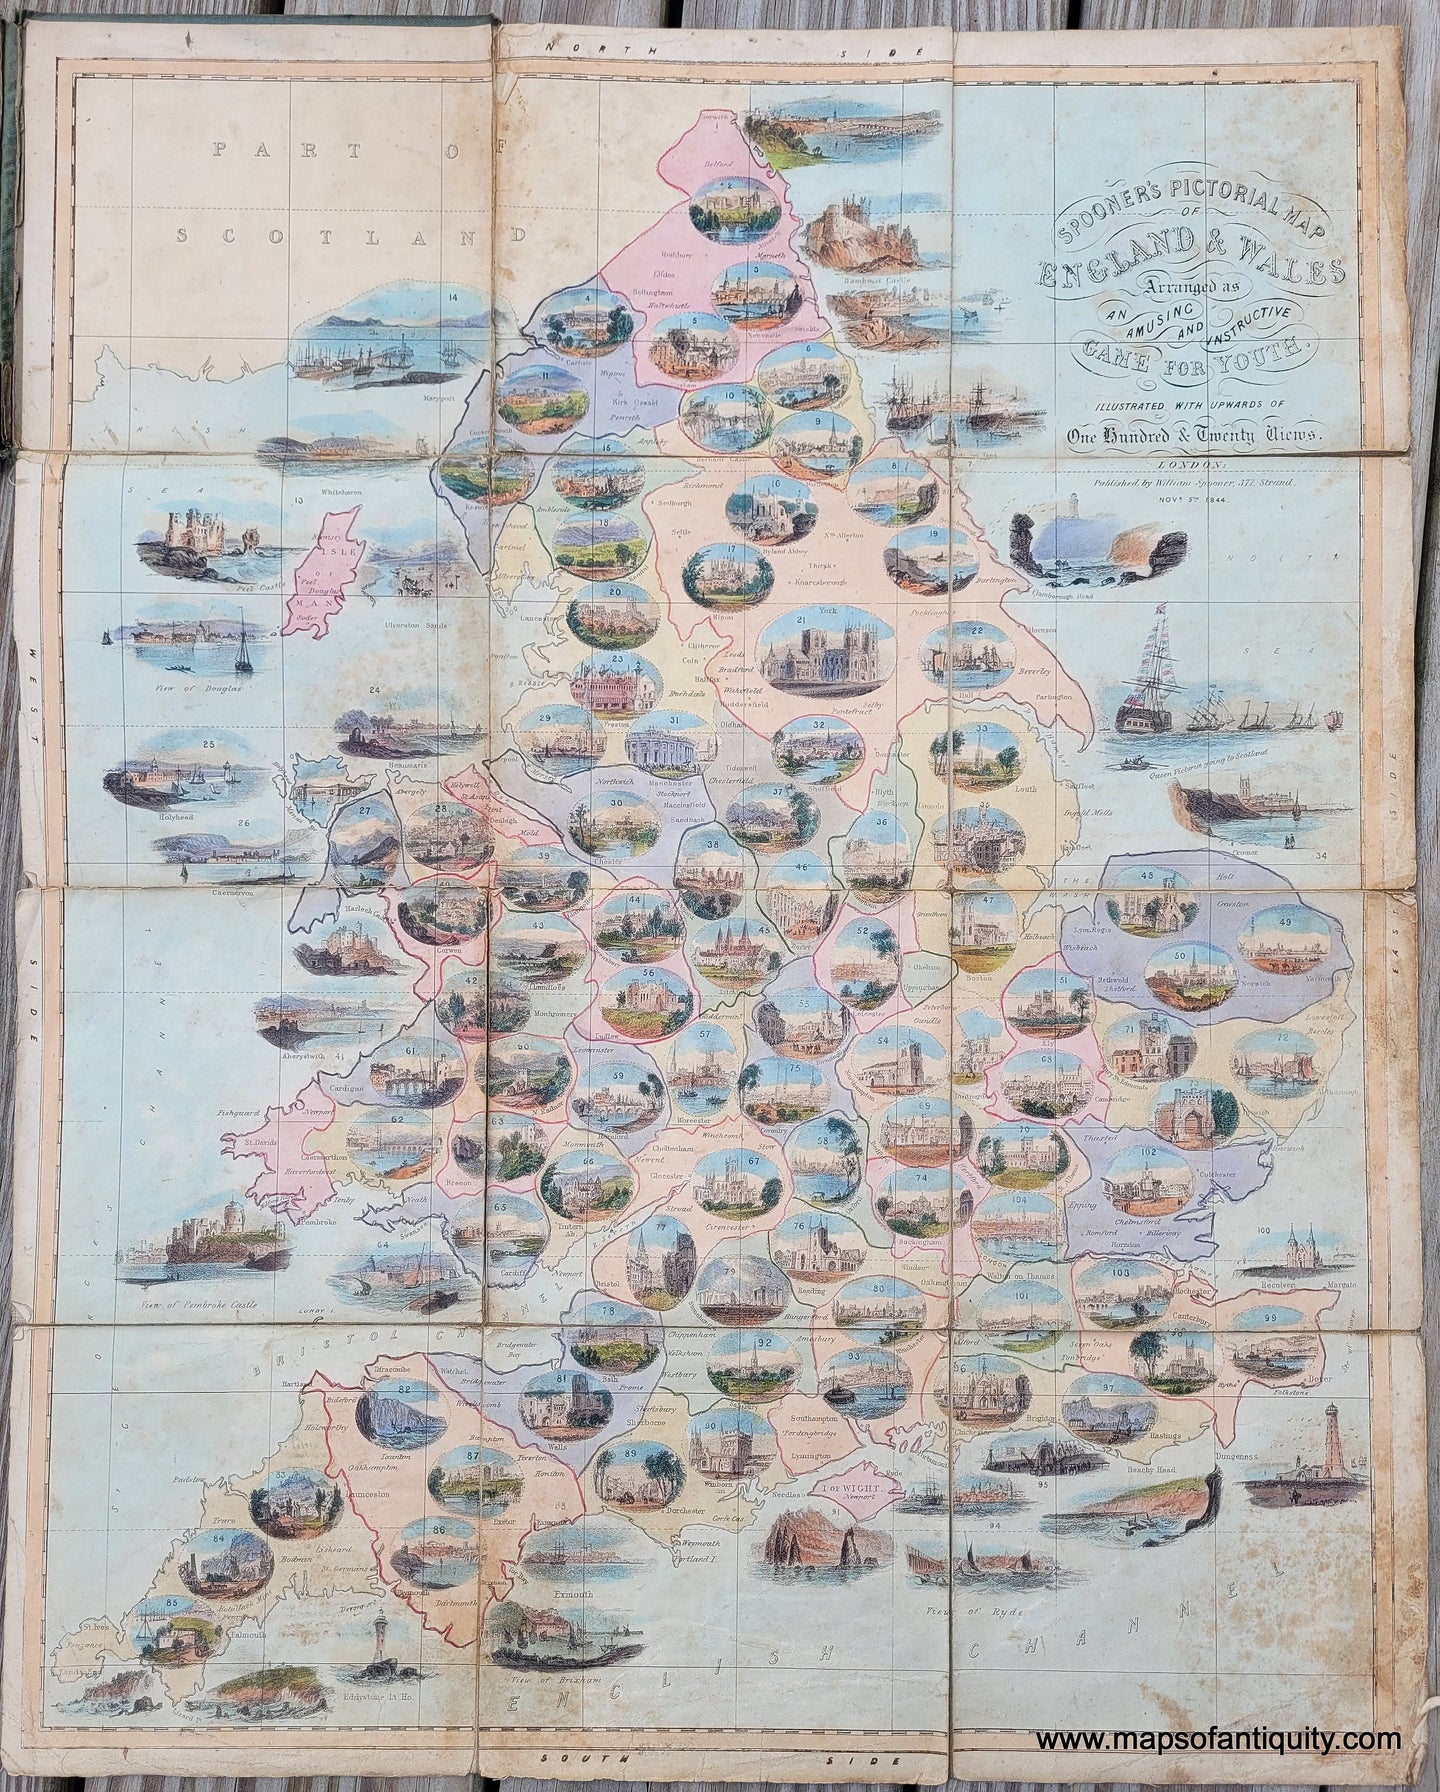 Genuine-Antique-Folding-Map-Spooners-Pictorial-Map-of-England-Wales-Arranged-as-an-Amusing-and-Instructive-Game-for-Youth-Illustrated-with-Upwards-of-One-Hundred-Twenty-Views--1844-William-Spooner-Maps-Of-Antiquity